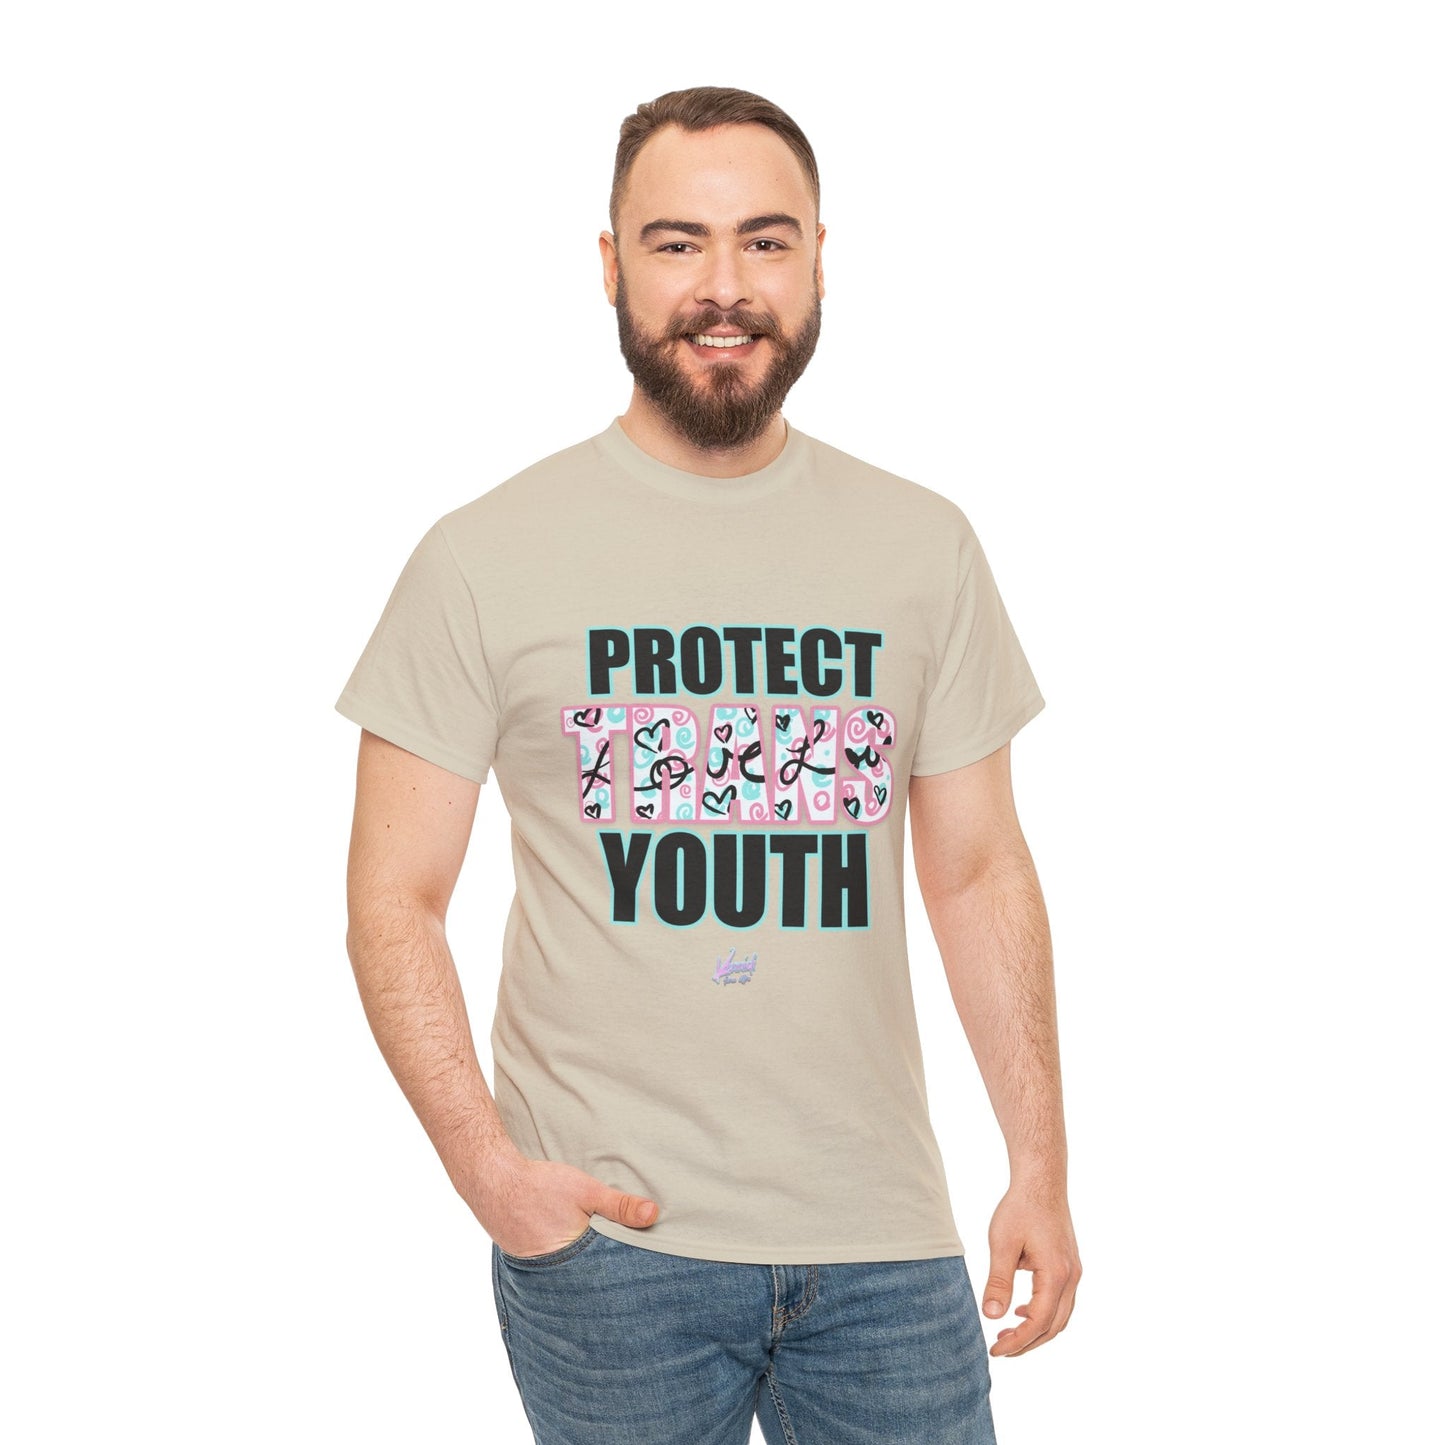 Protect Trans Youth Love 3.0 Unisex Heavy Cotton Tee - Sand / S T - Shirt